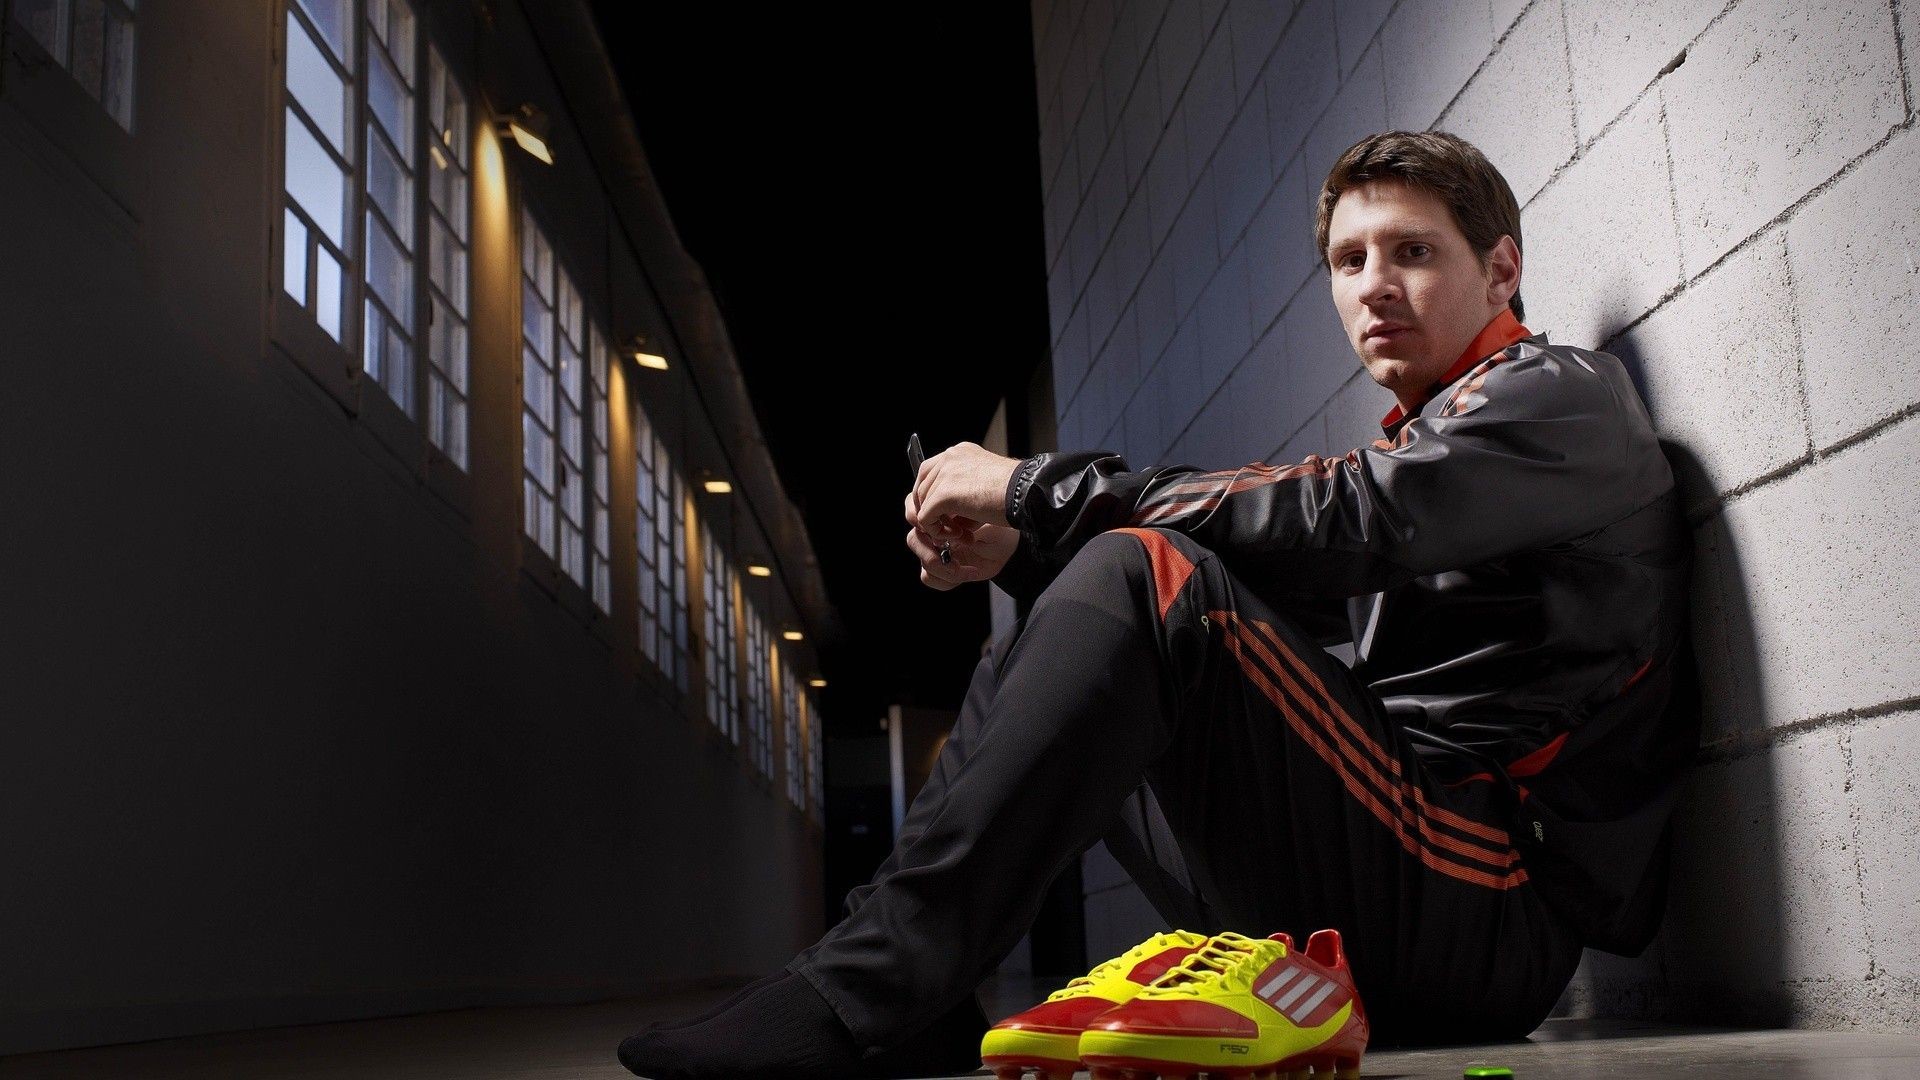 1920x1080 Lionel Messi HD Wallpapers and Desktop Background Images Download Free   ...